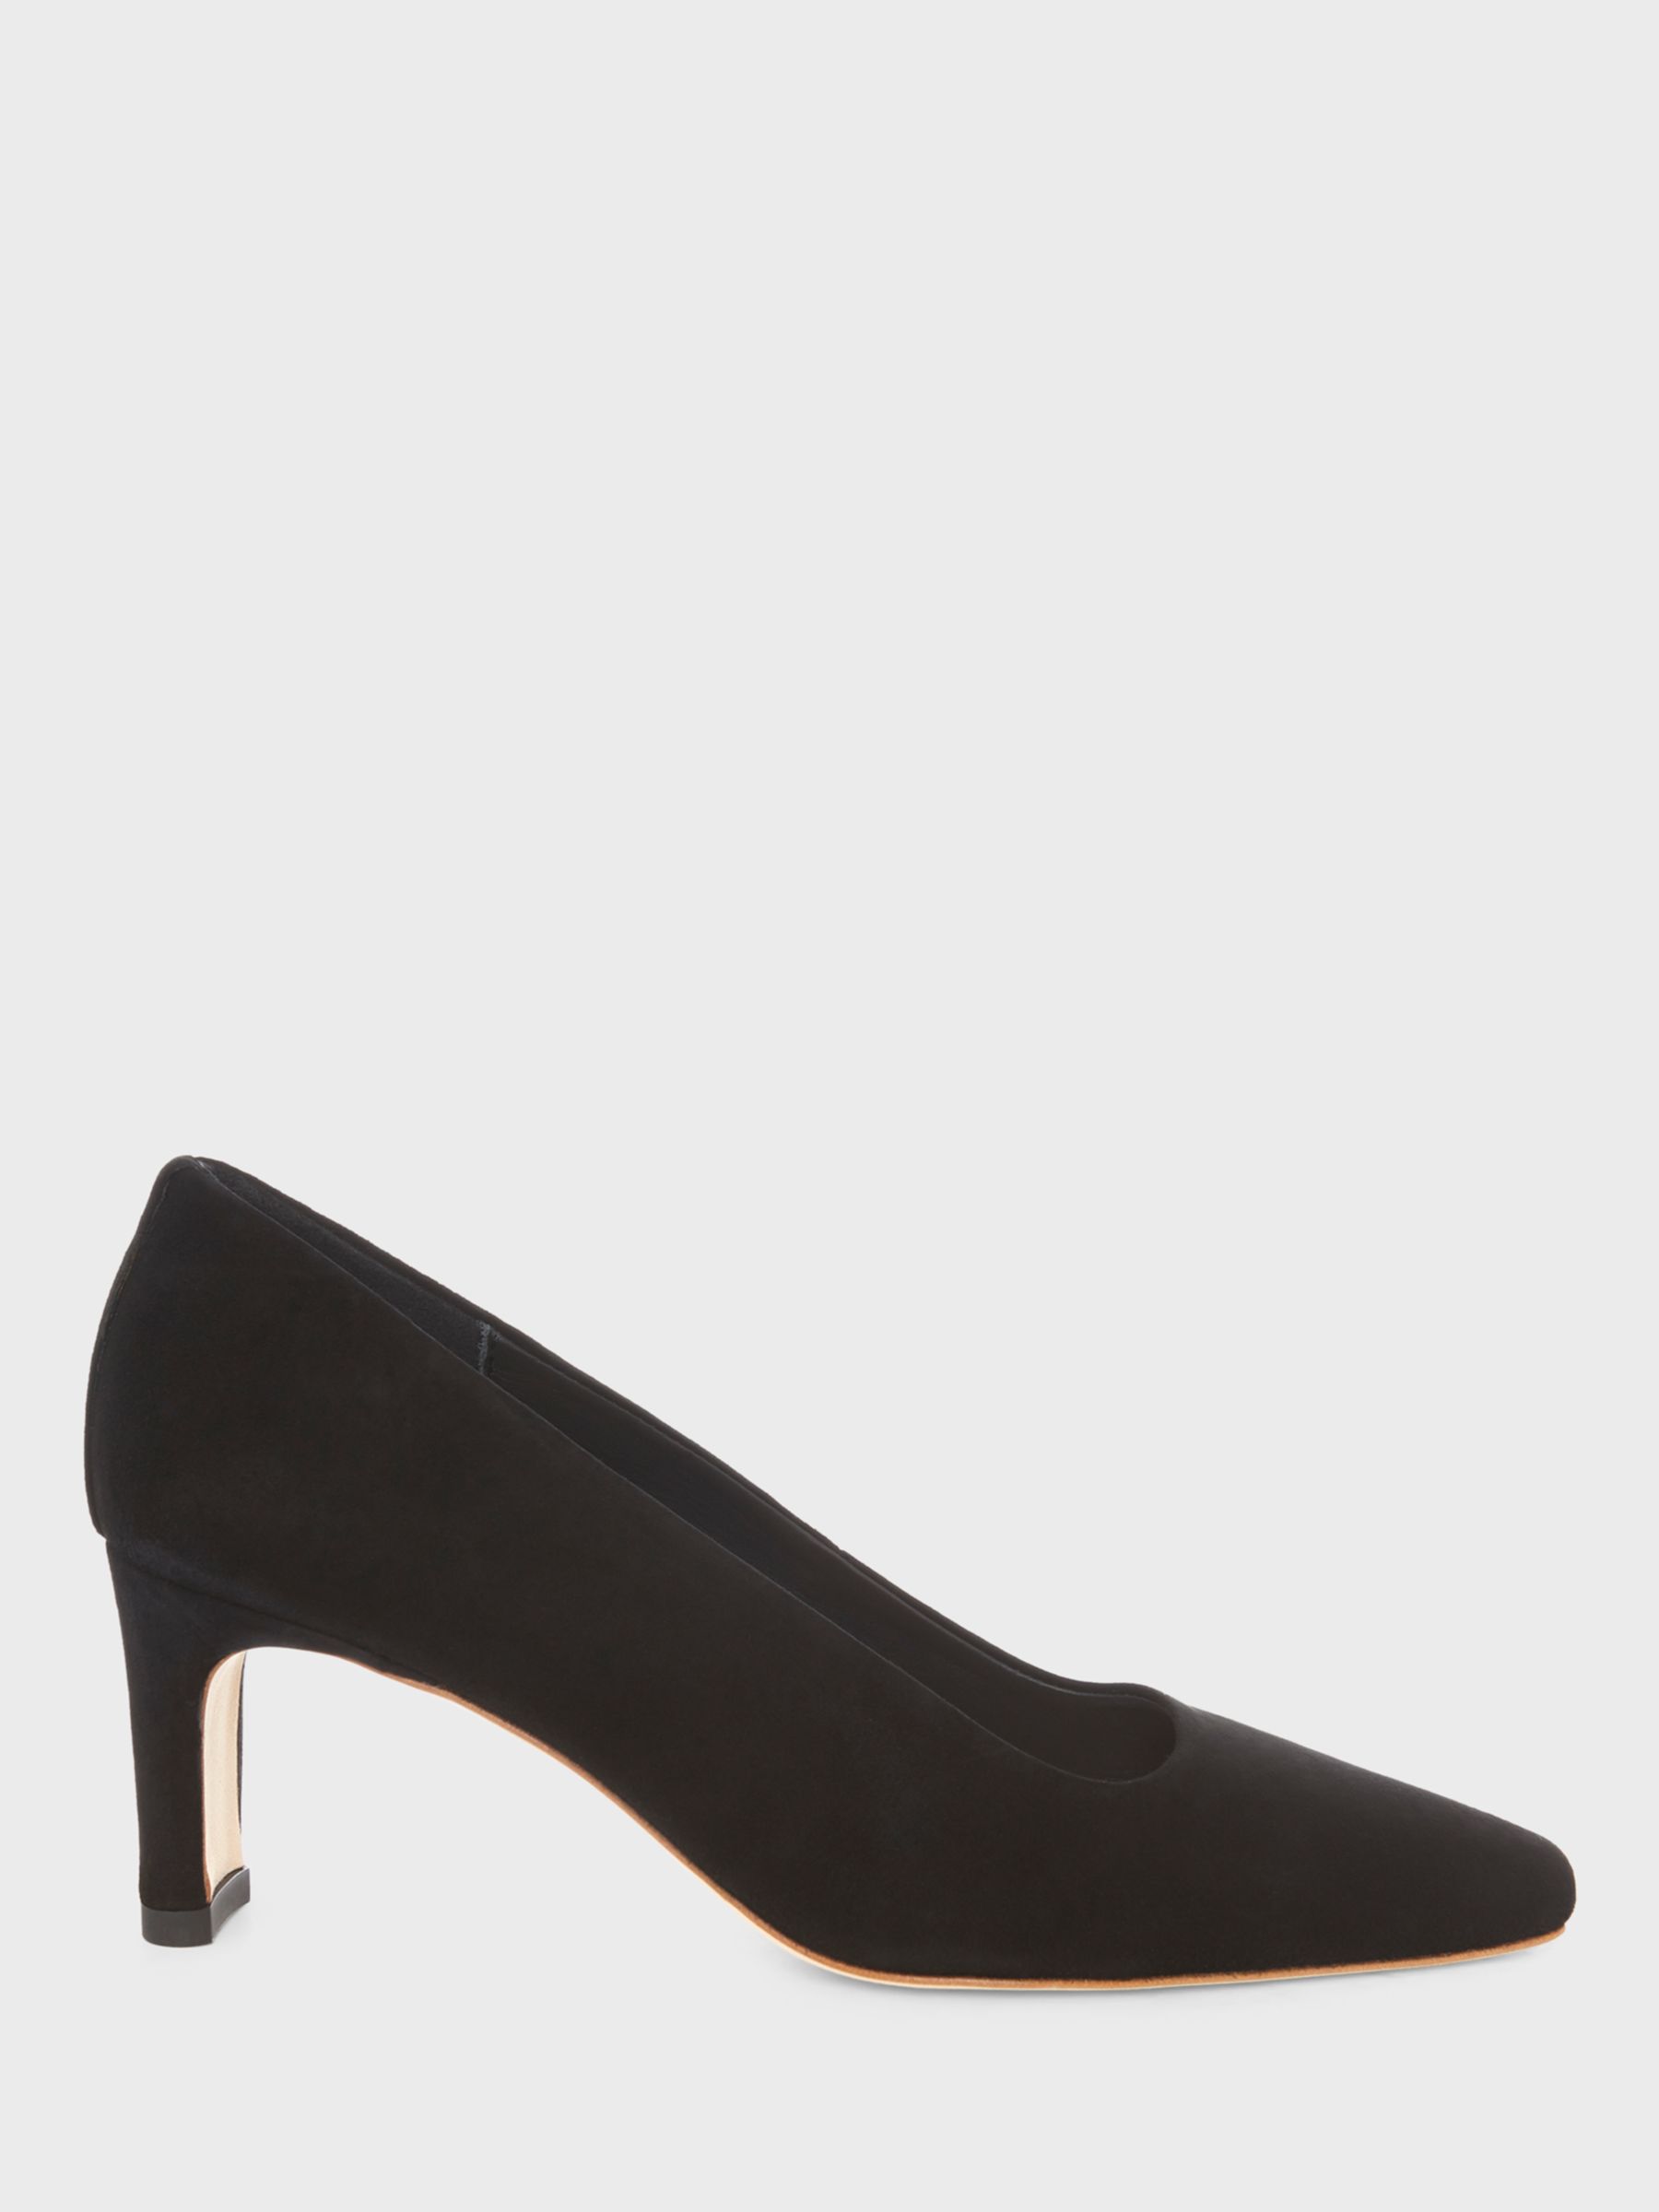 Hobbs Merle Suede Court Shoes